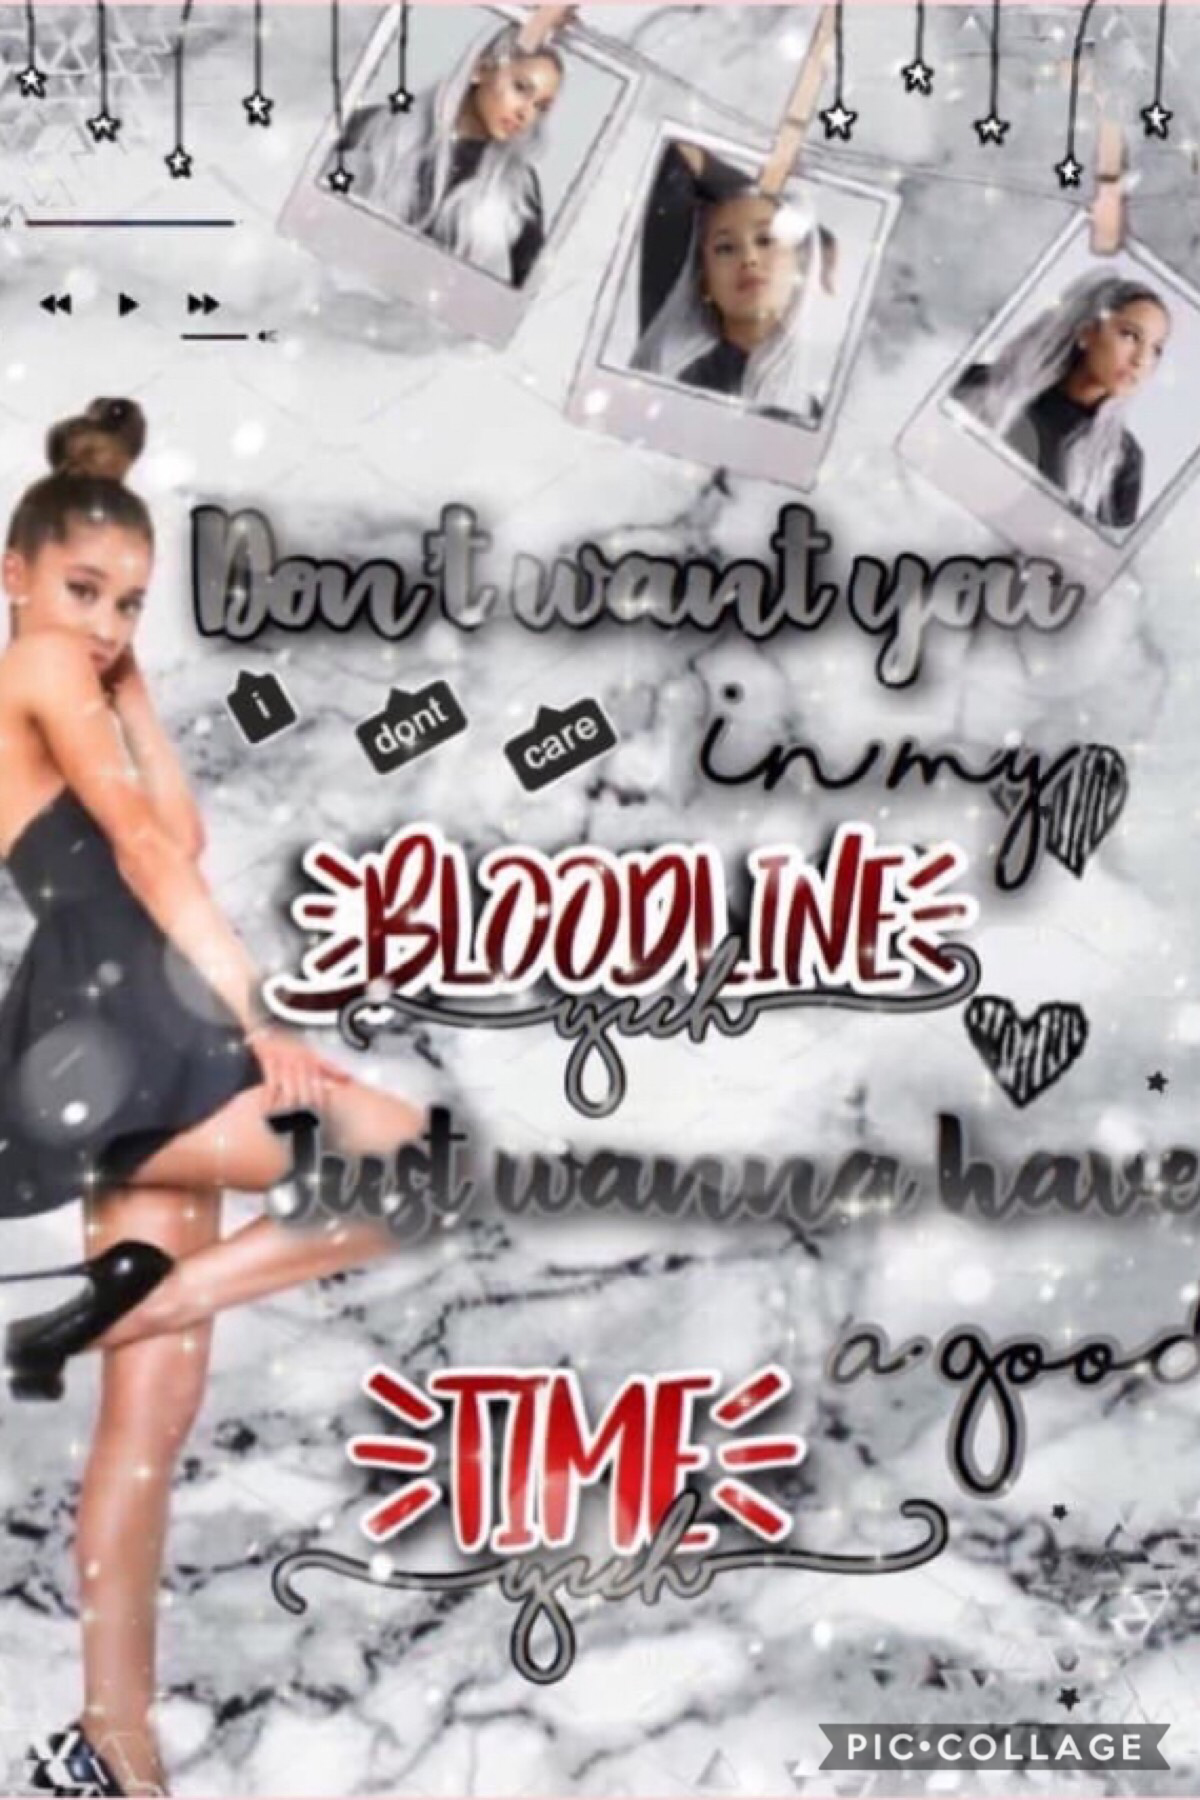 Collab with❤️❤️❤️❤️
GRACIE_IS_HERE
SHE DID THE EXCELLENT TEXT AND I DID THE BACKGROUND LOVE HOW THIS TURNED OUT XX❣️